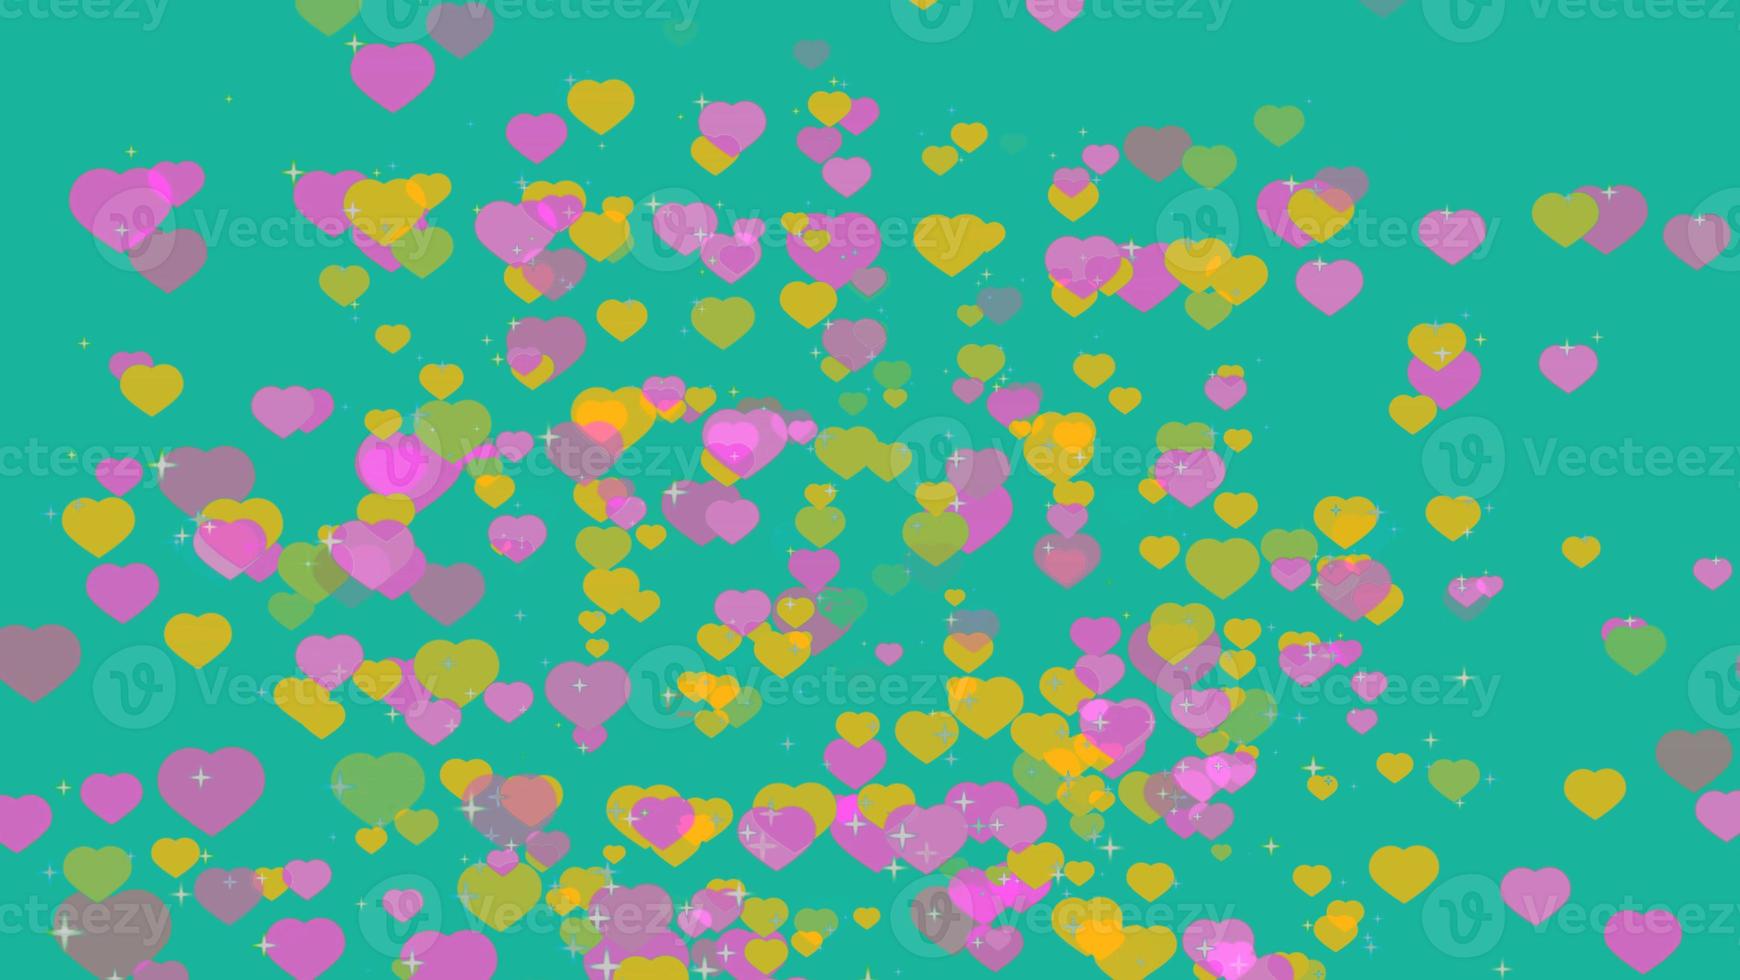 Million hearts pink and orange color dimension absract on aqua ocean photo